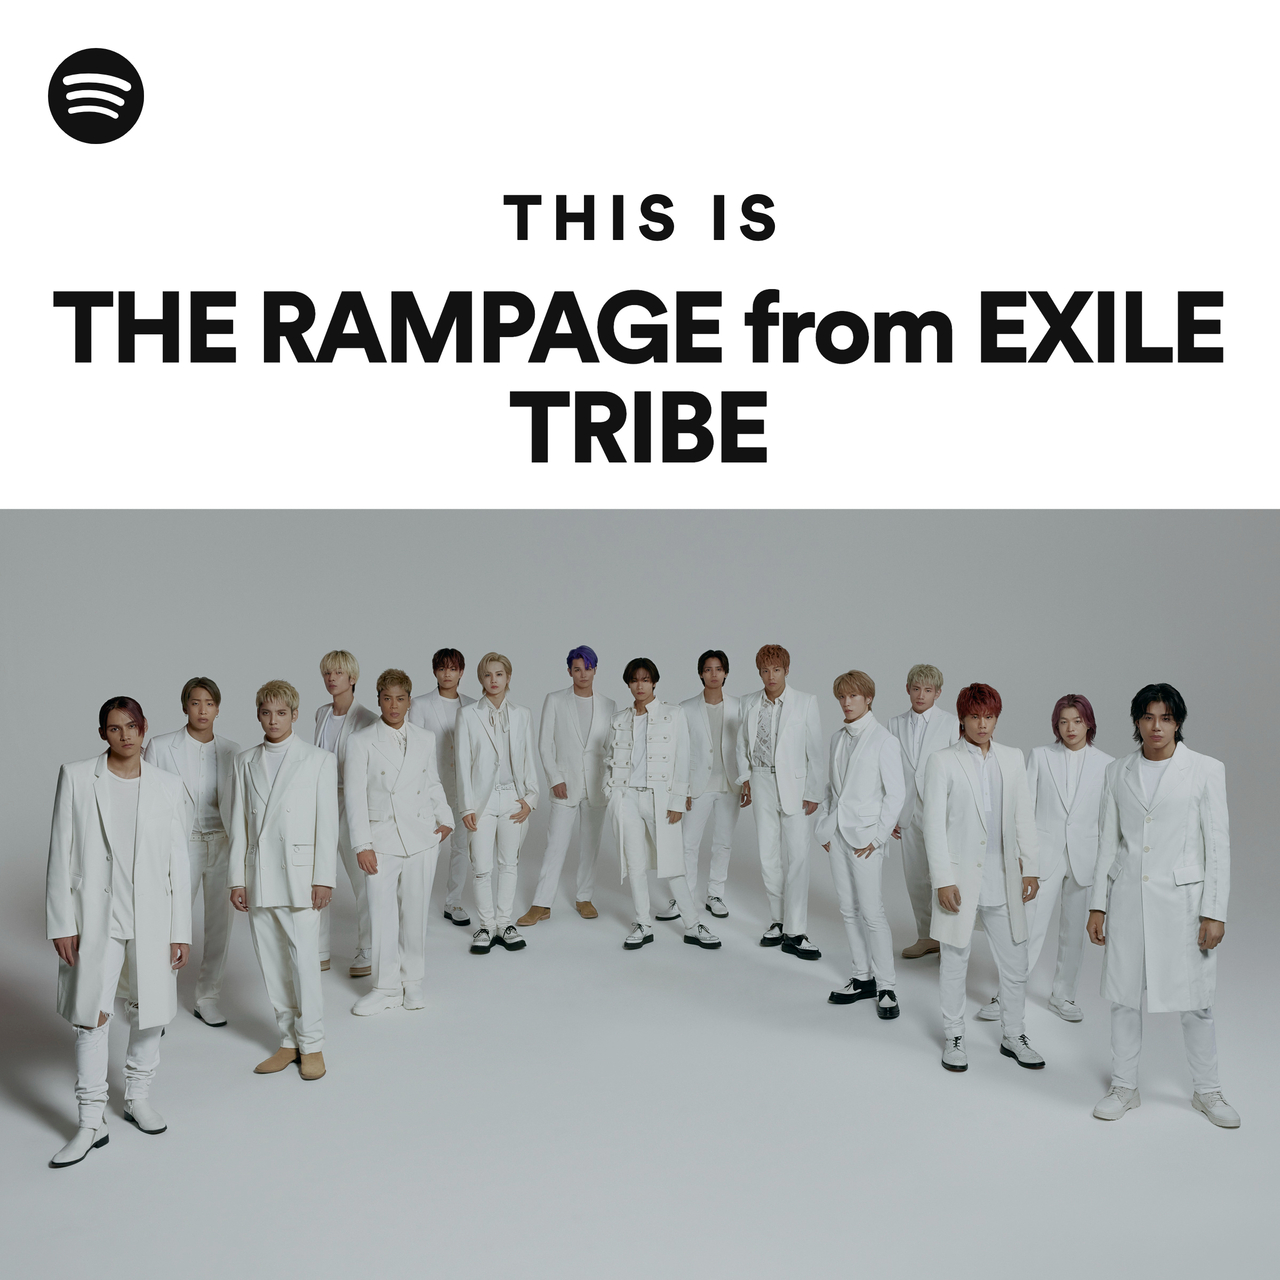 THE RAMPAGE from EXILE TRIBE | Spotify